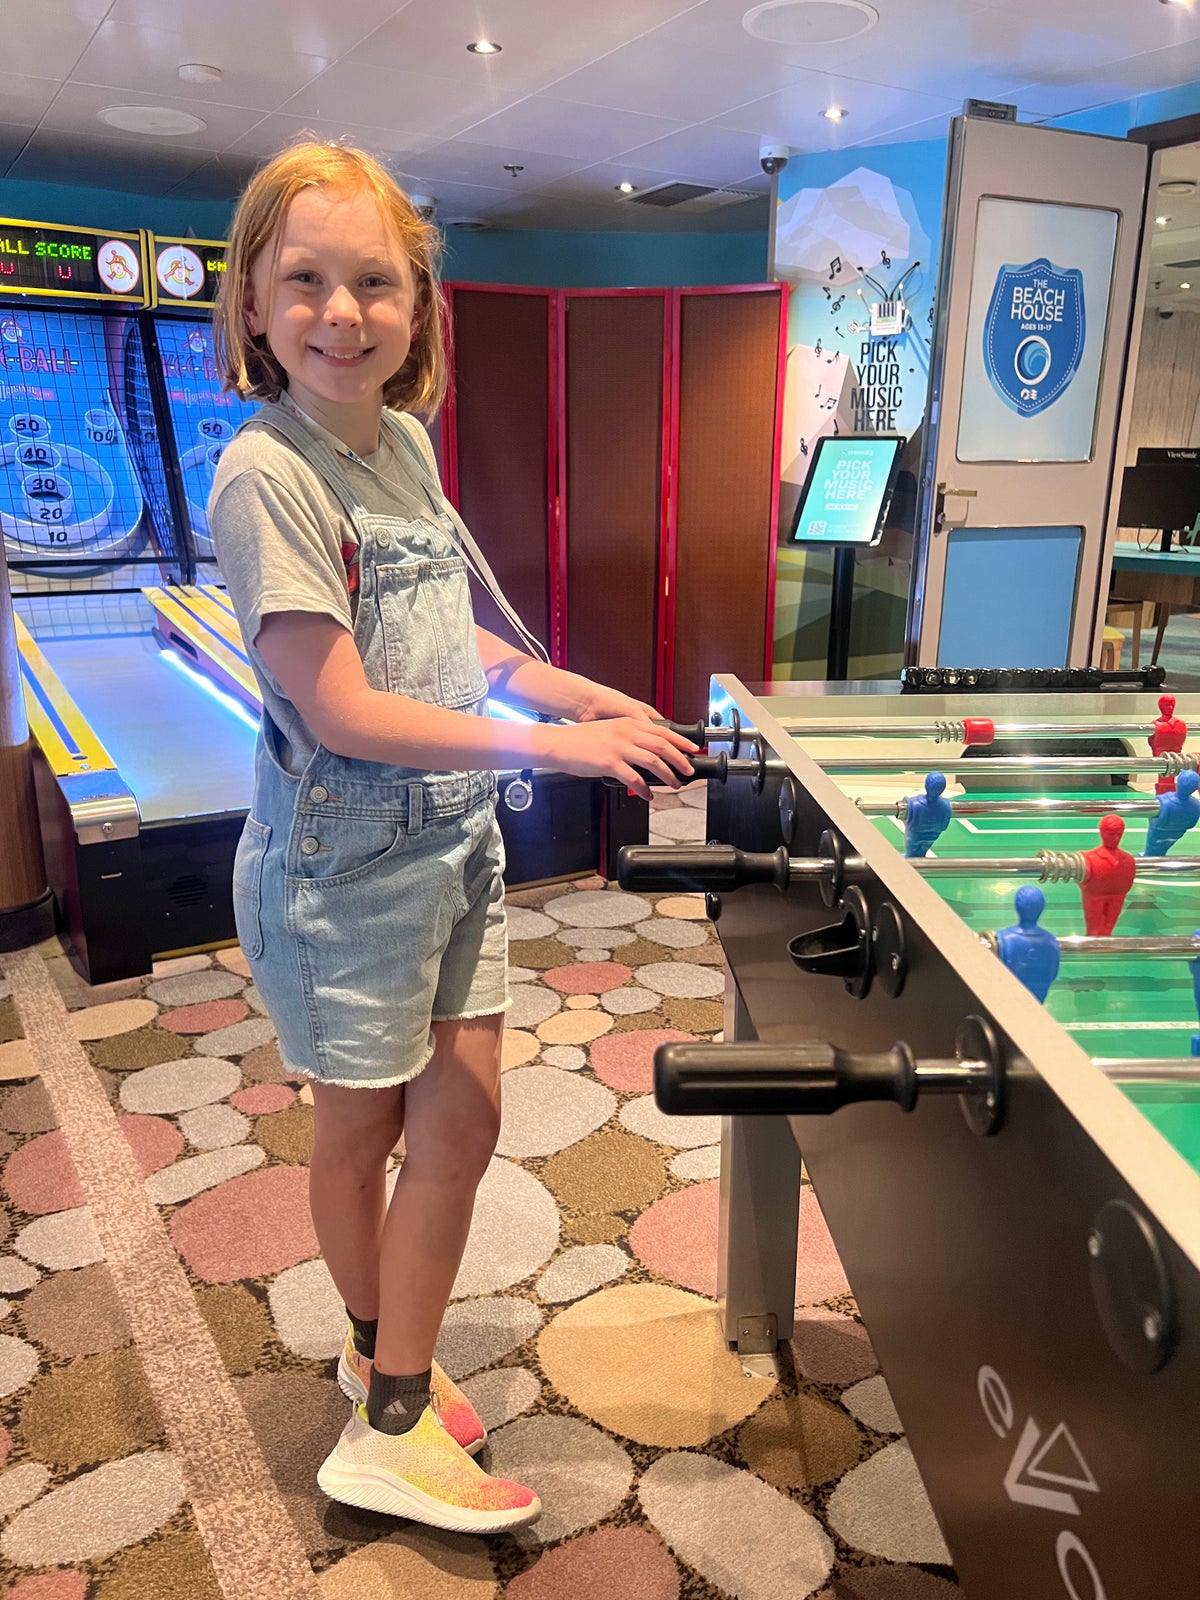 Ellie at Camp Discovery kids club on Princess Cruises